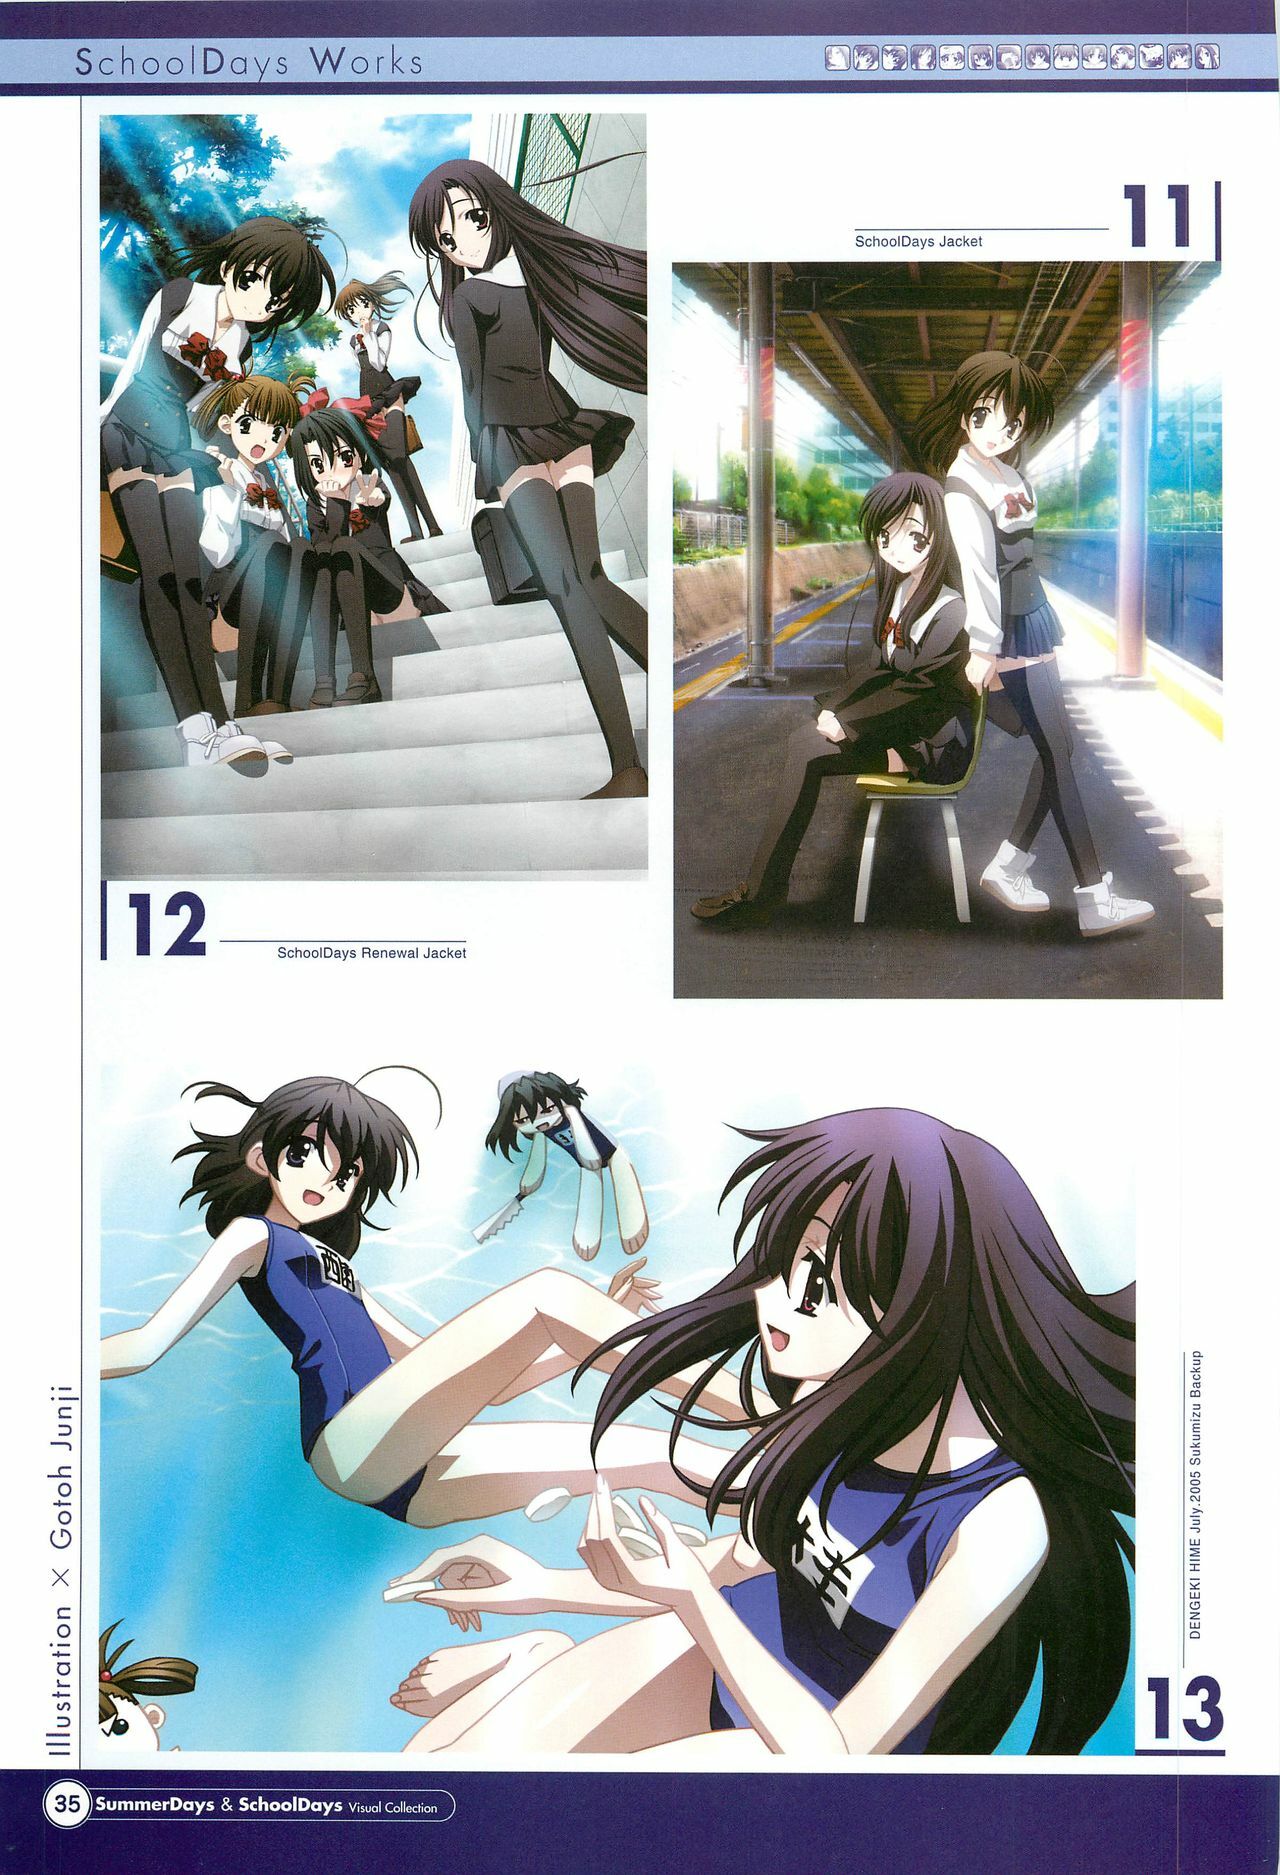 SummerDays & School Days Visual Collection page 37 full